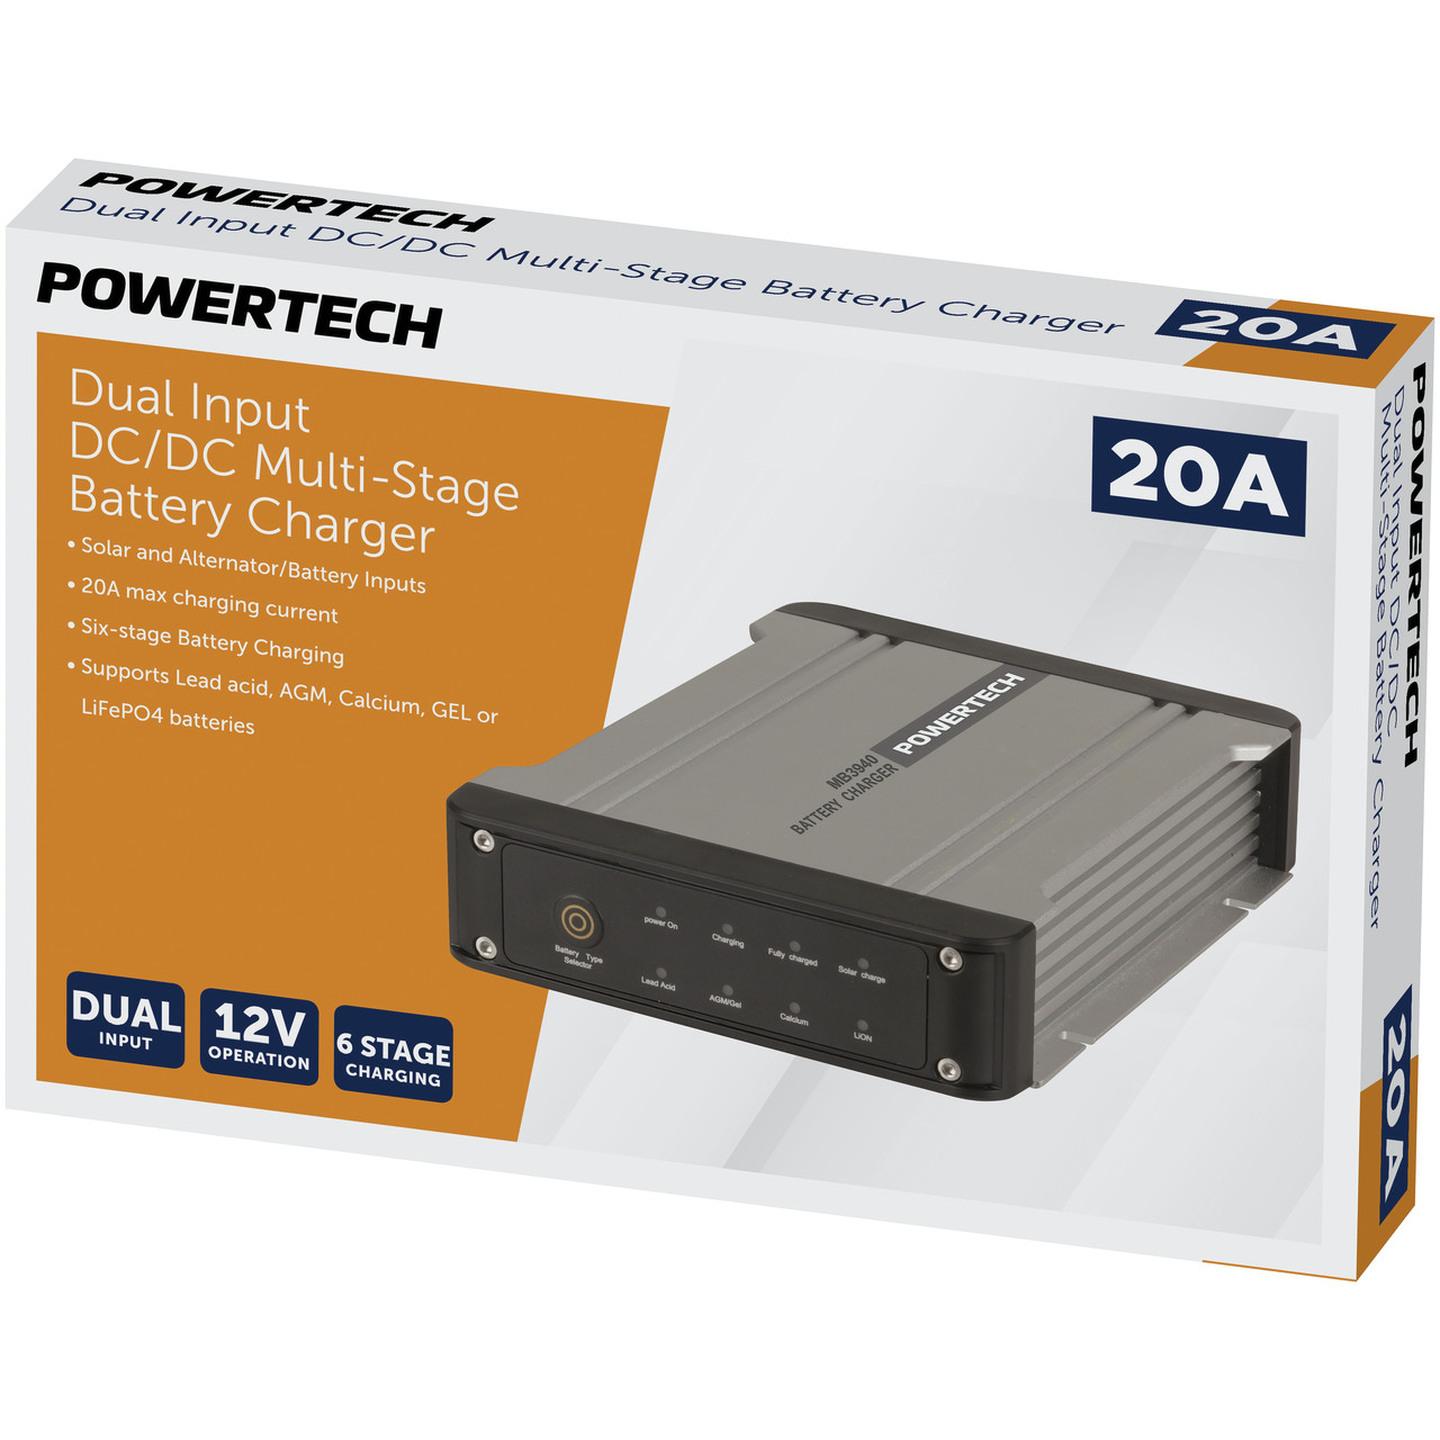 Dual Input 20A DC/DC Multi-Stage Battery Charger to suit Lead and Lithium Style Batteries